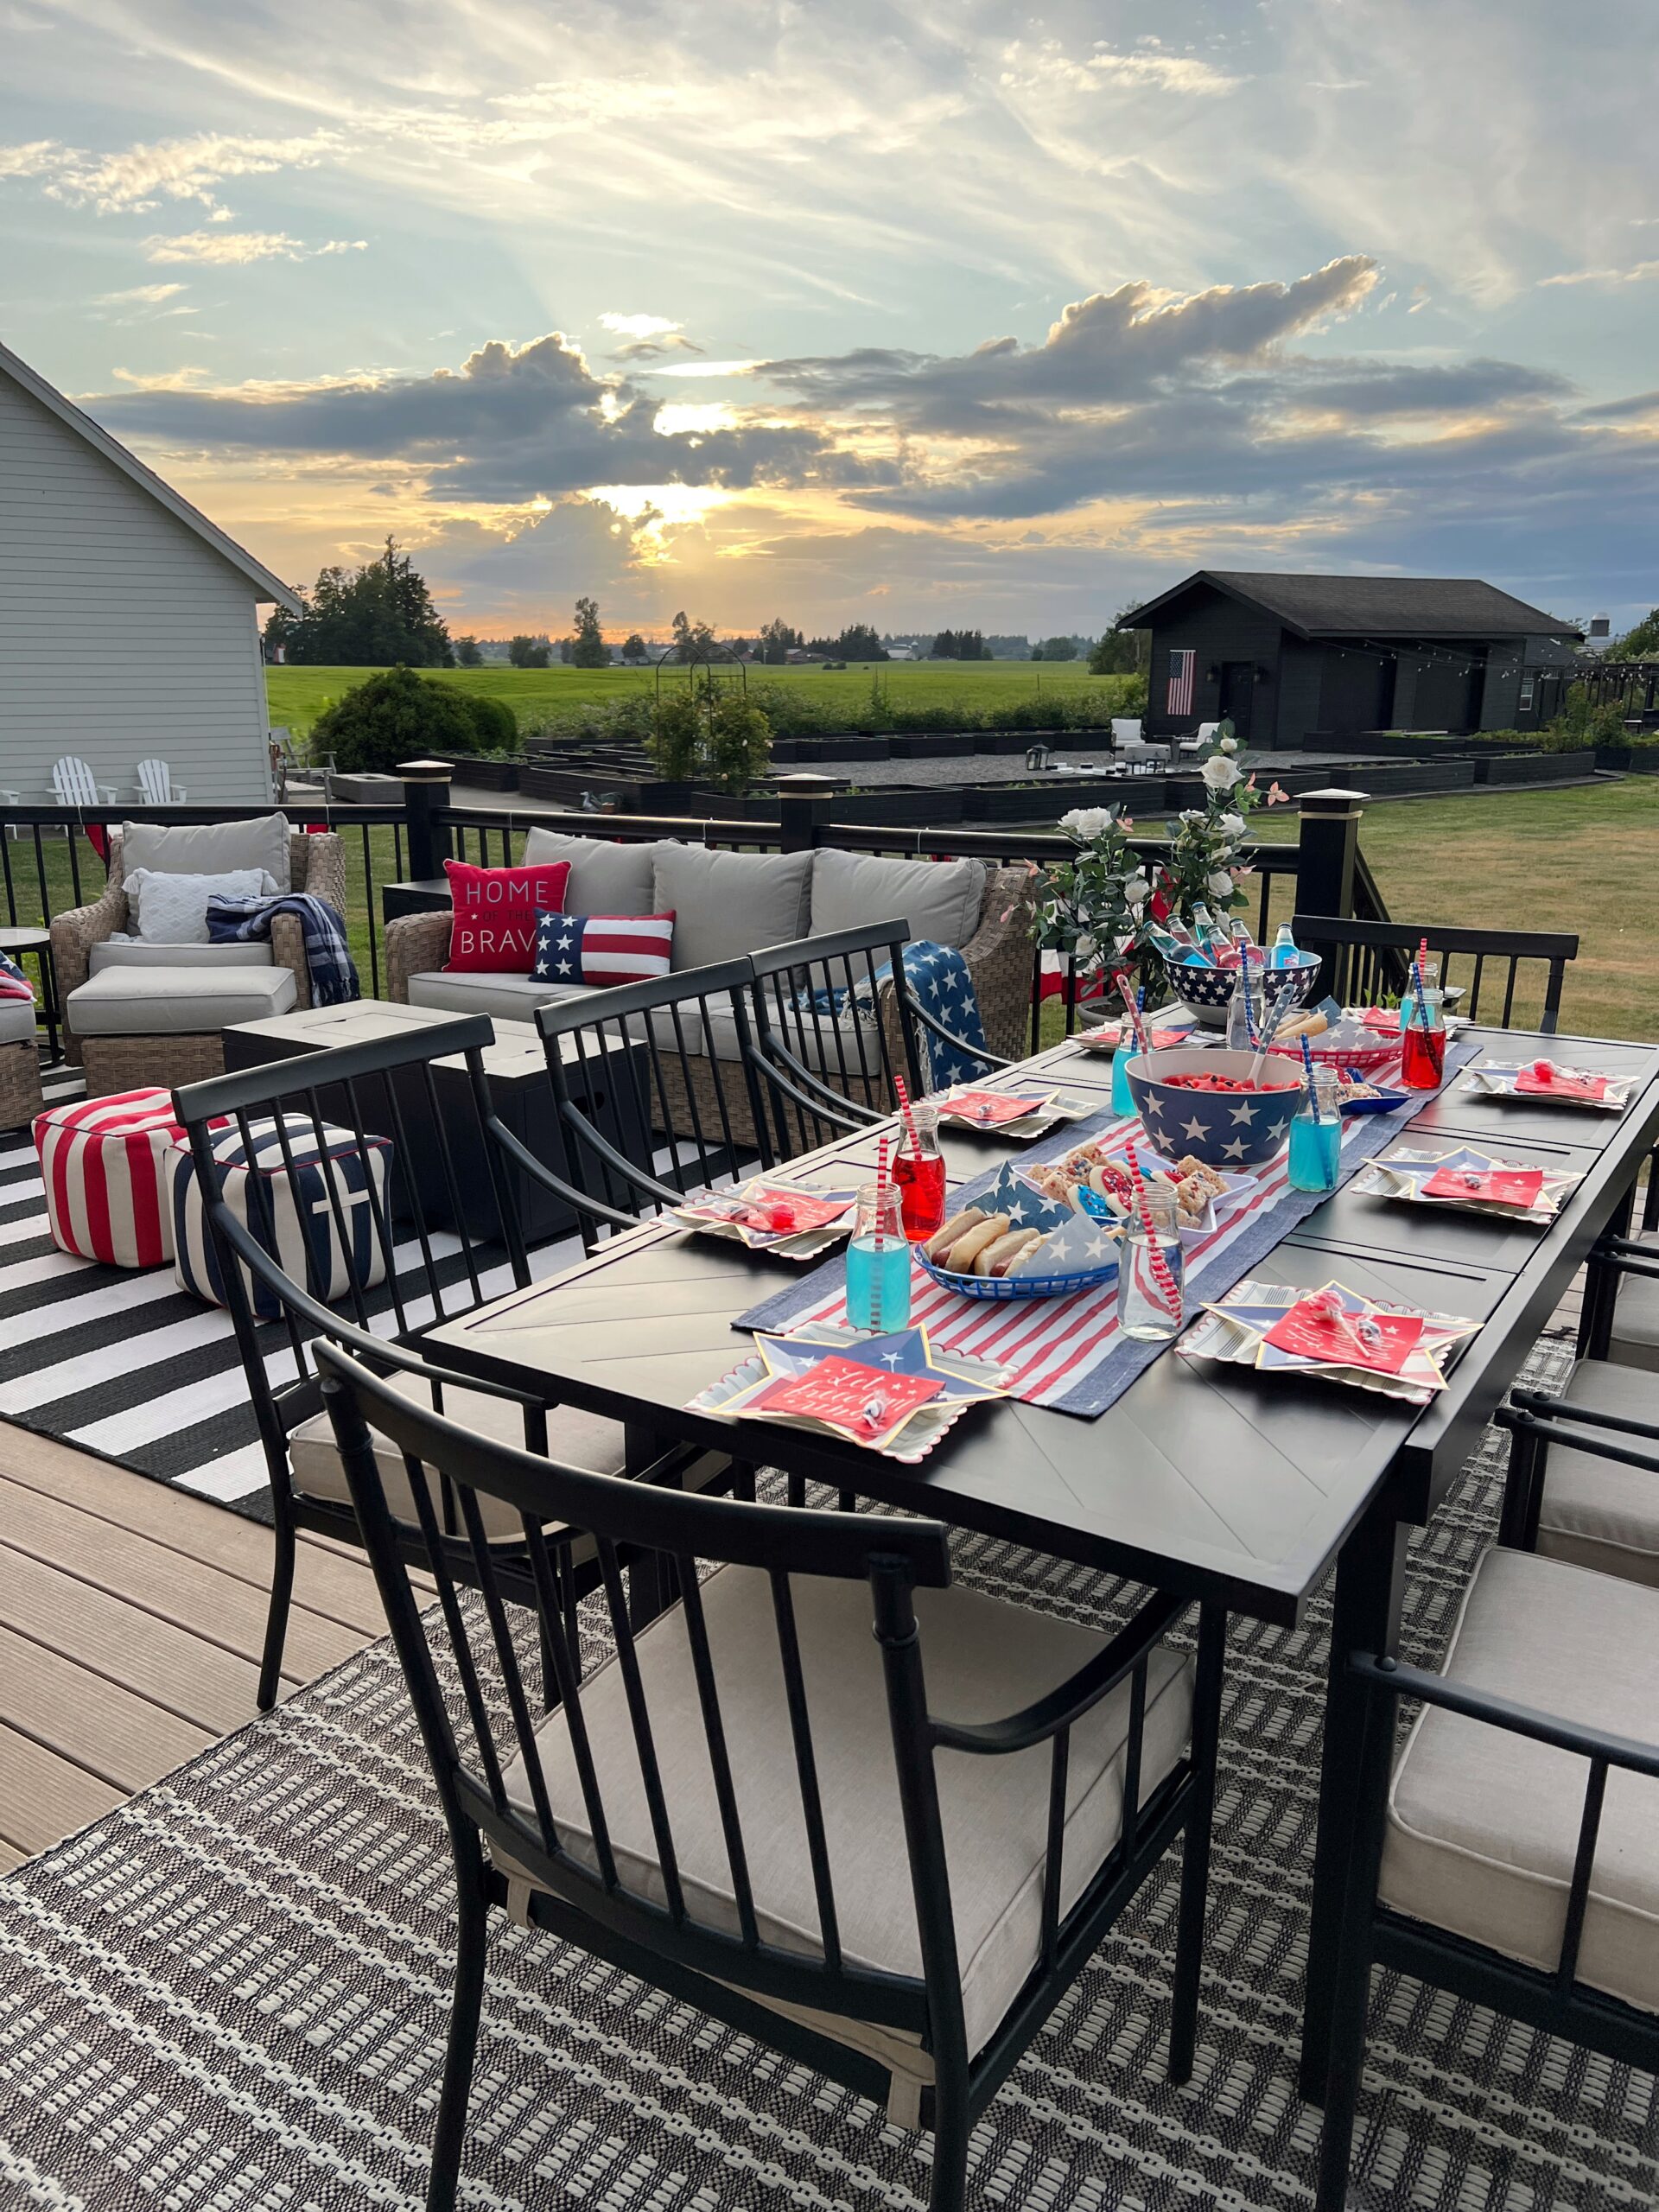 Fourth of July Outdoor Party